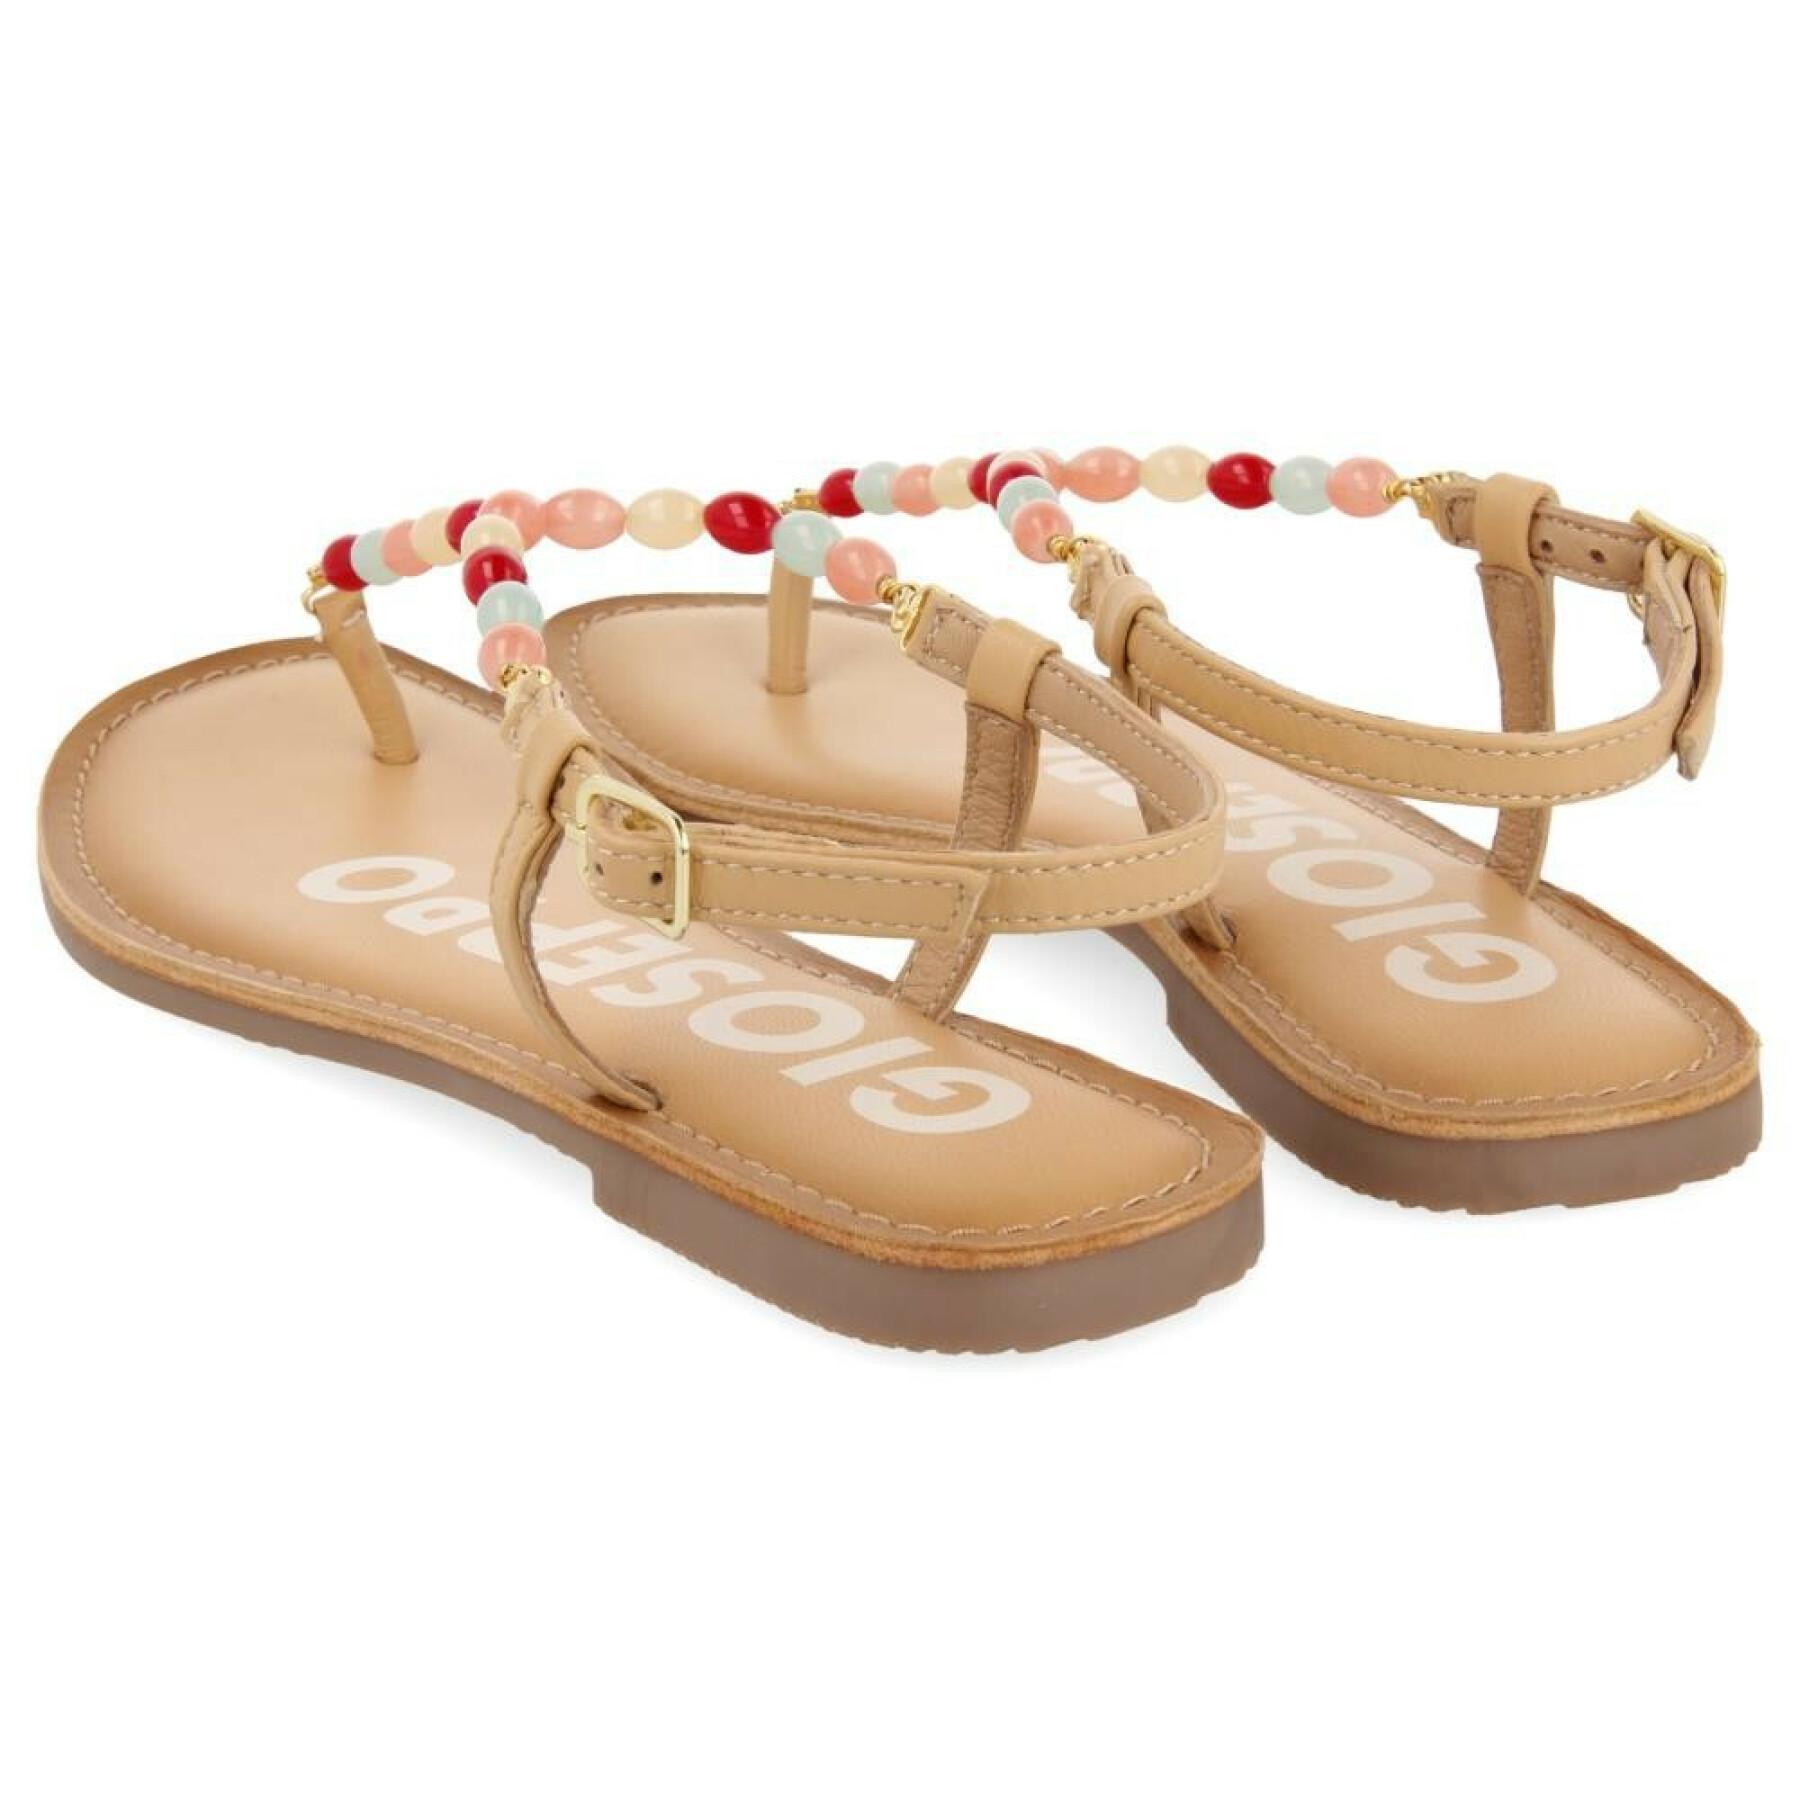 Sandales nu-pieds femme Gioseppo Lazzate